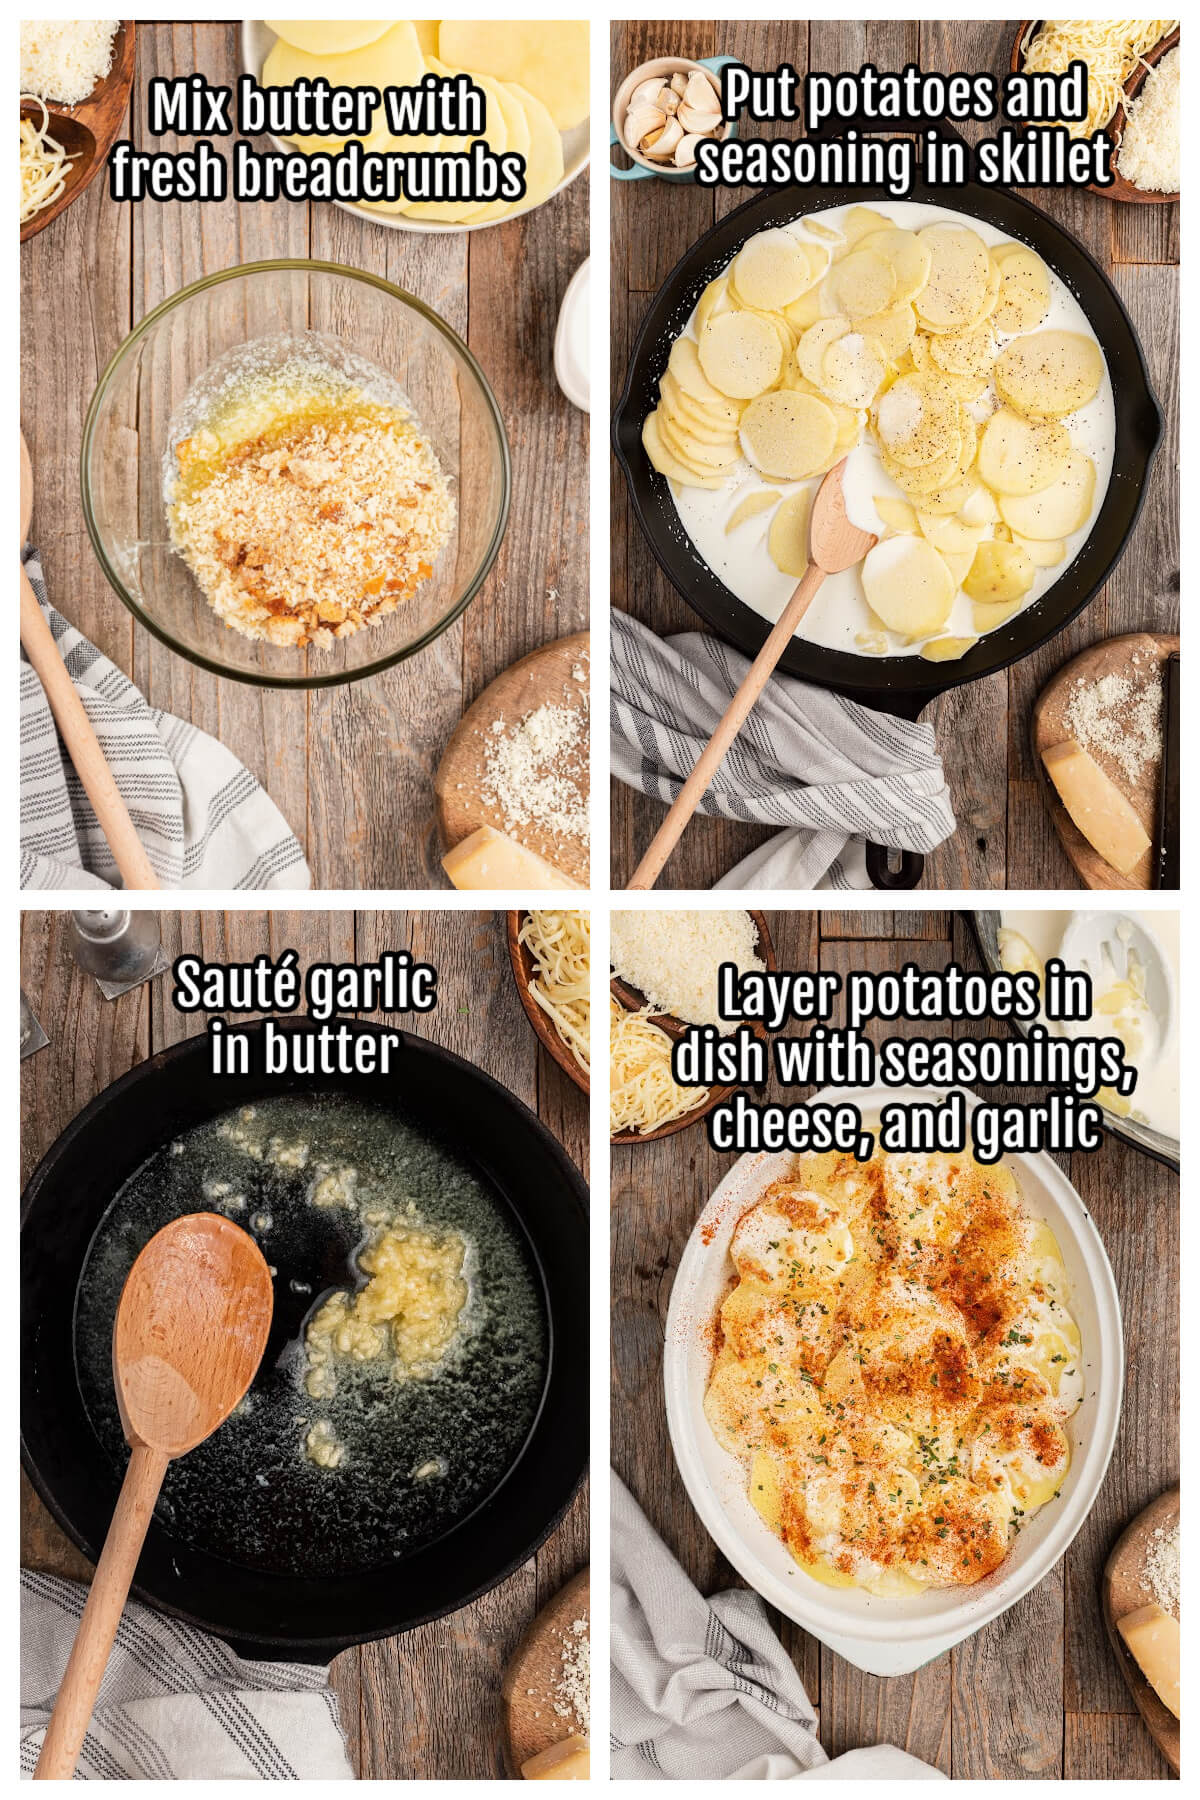 Collage of the Gratin Potatoes Side dish